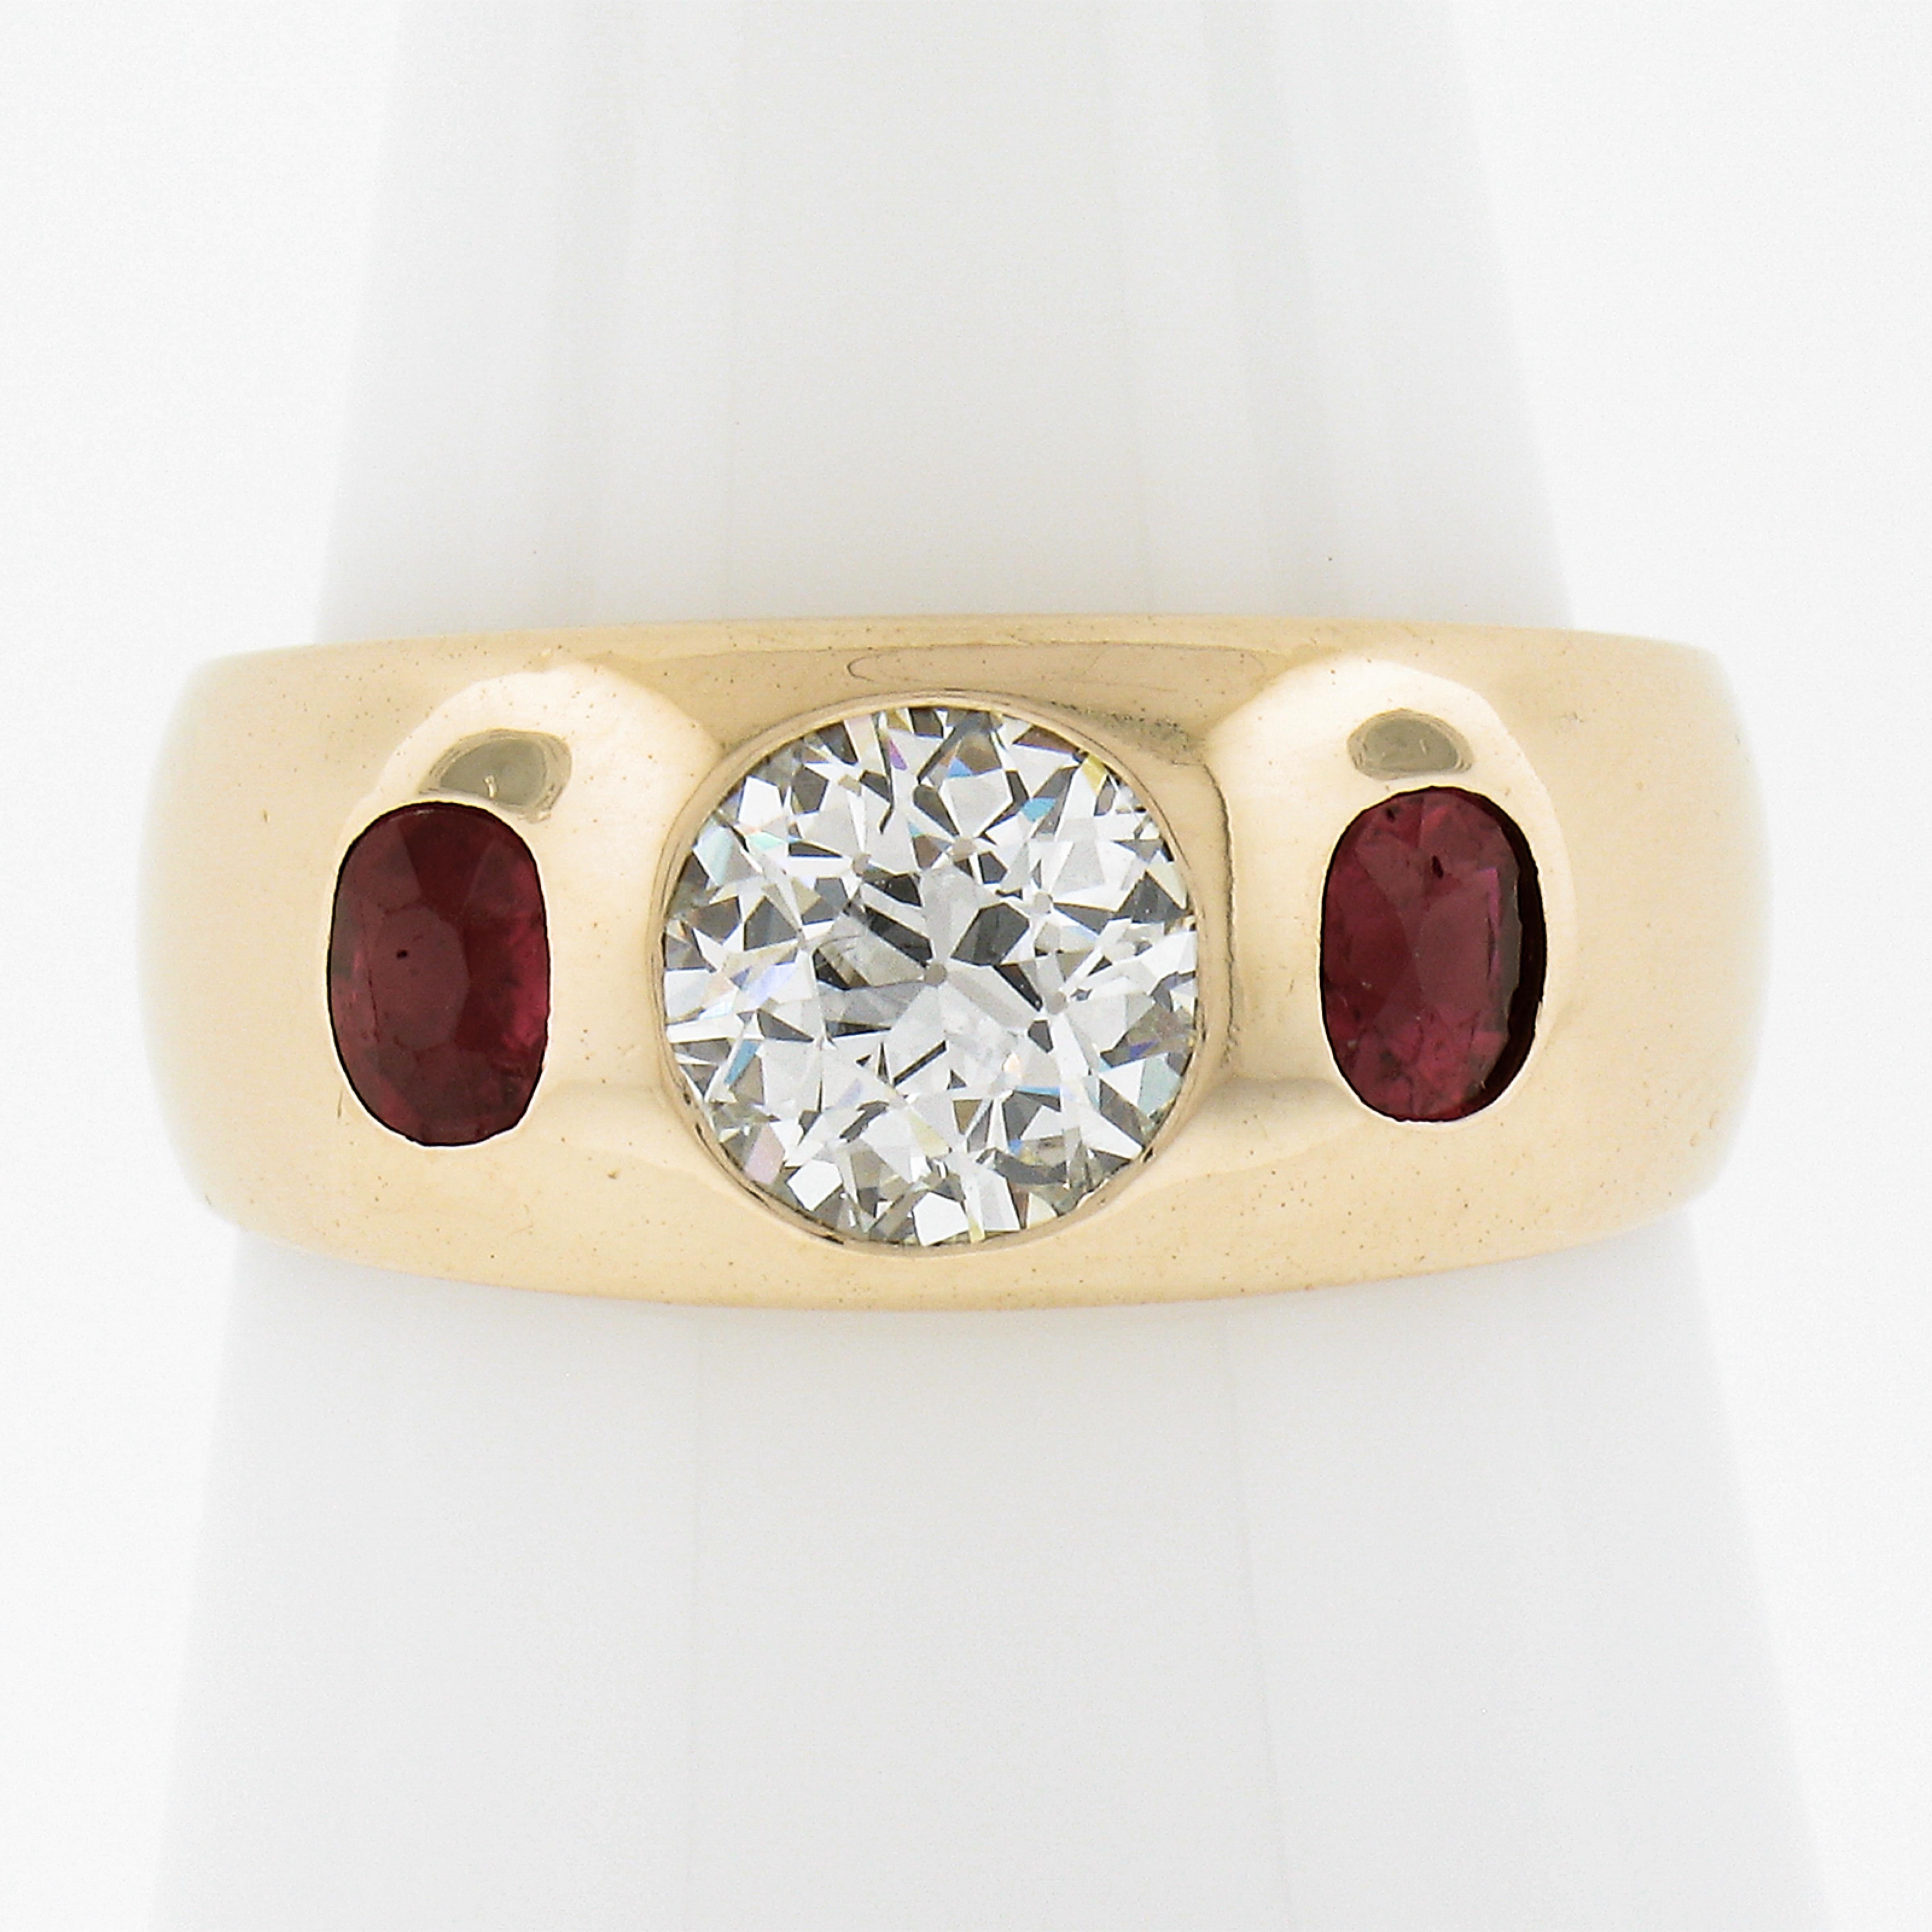 Here we have an all original ring with a super fiery old European cut diamond center flush burnish set with old oval cut rubies on either side. This ring remains in excellent condition and is truly a must see! Enjoy! 

--Stone(s):--
(1) Natural